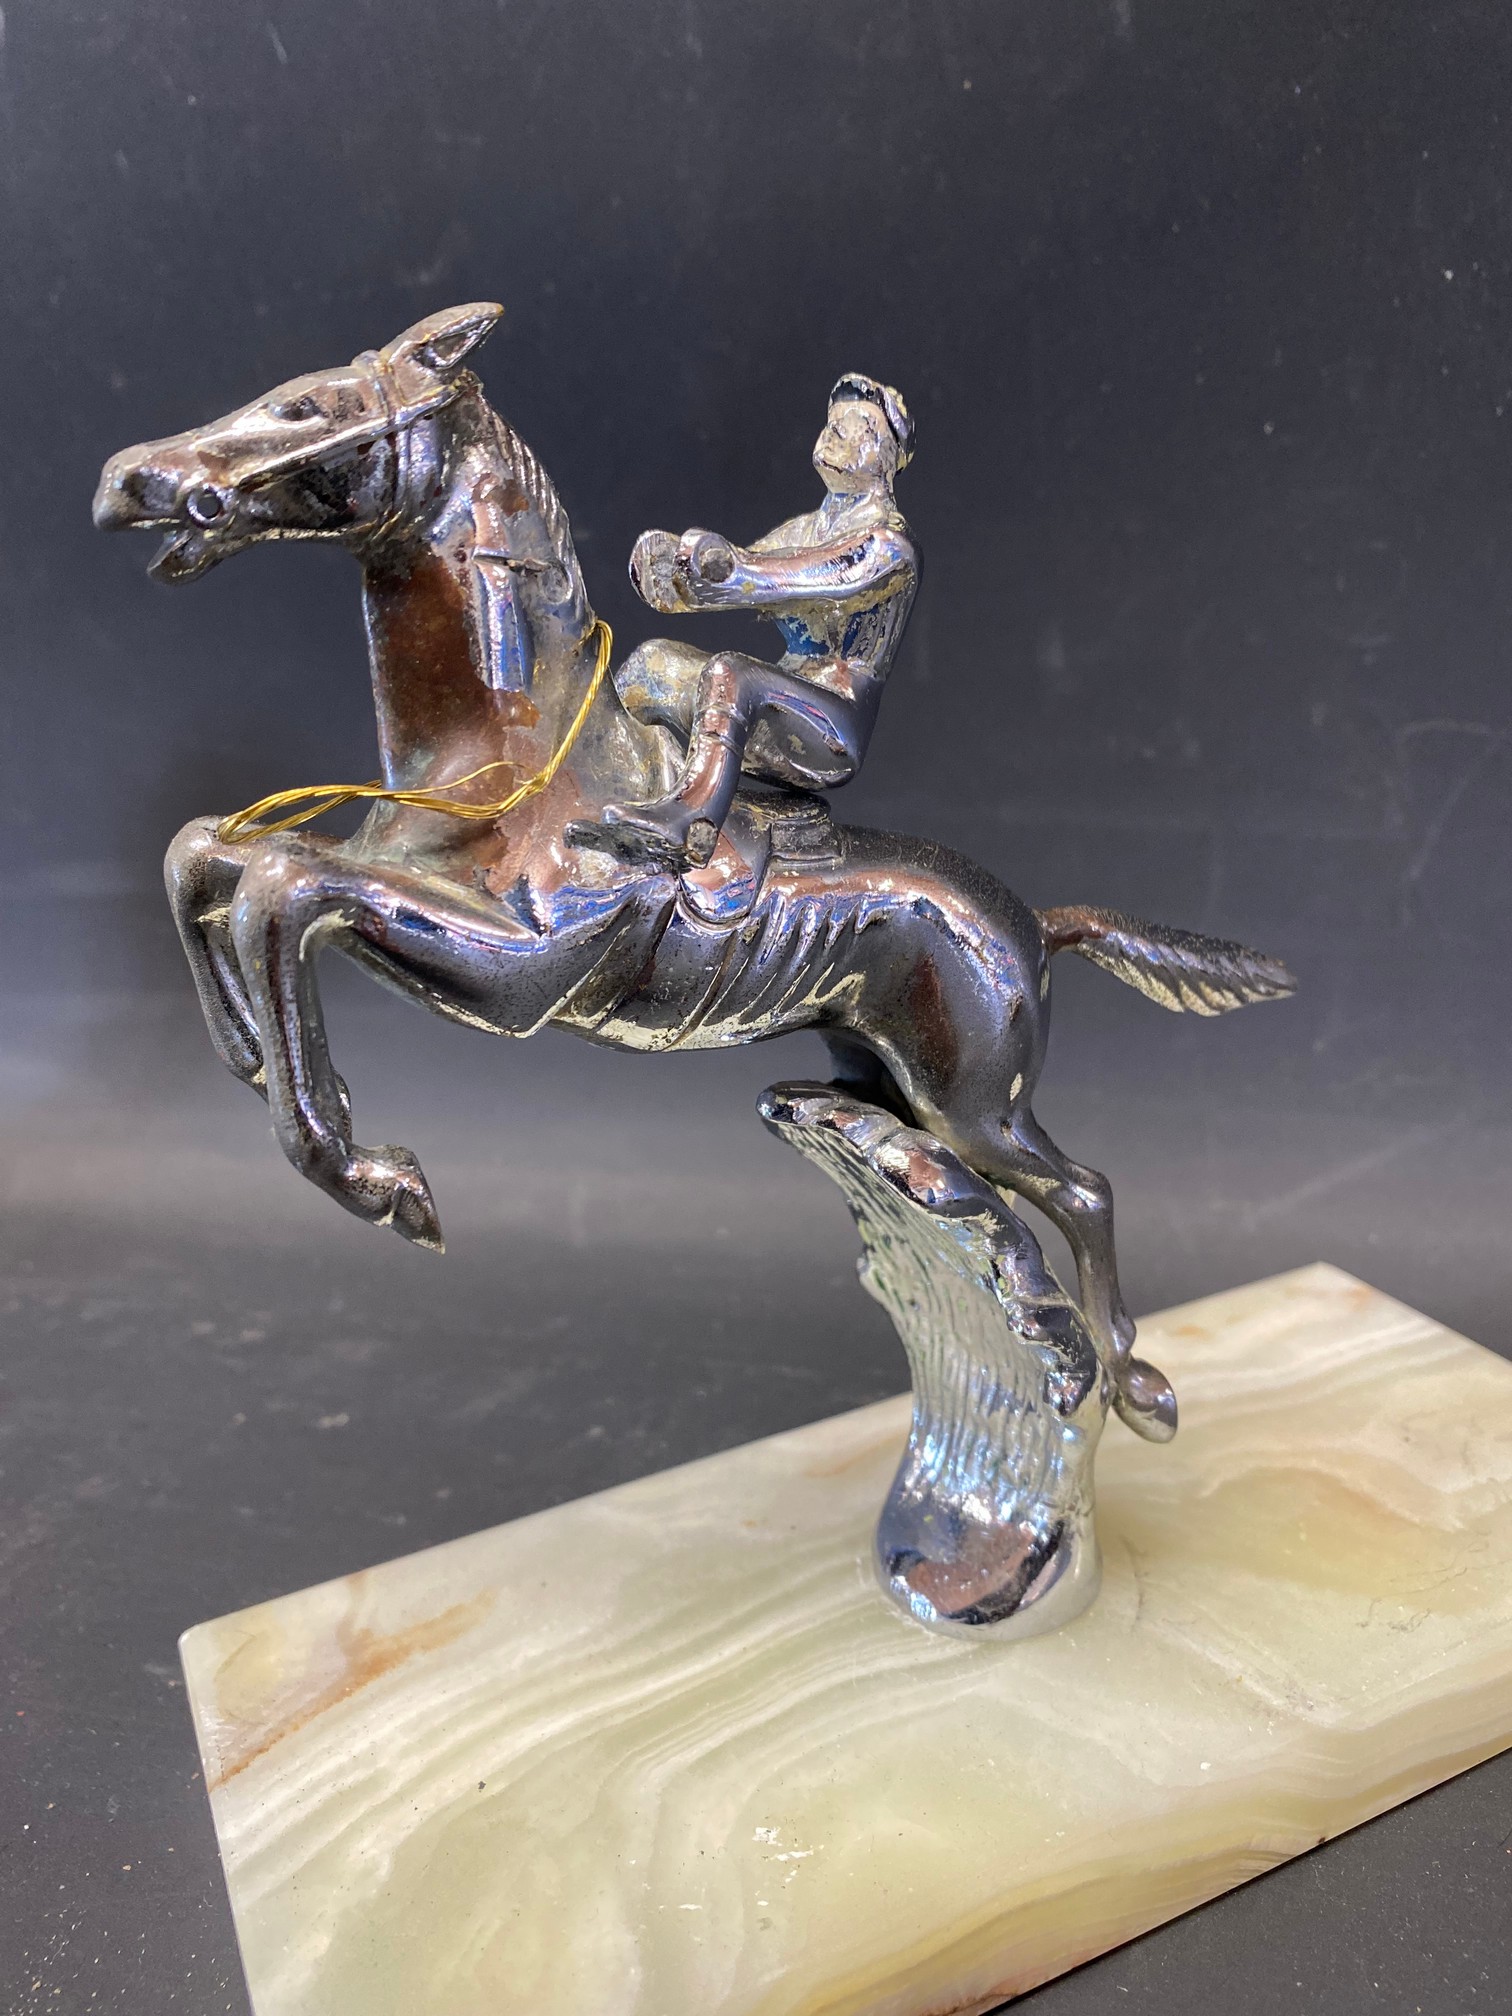 A Desmo accessory mascot in the form of a leaping horse with detachable jockey, mounted on an onyx